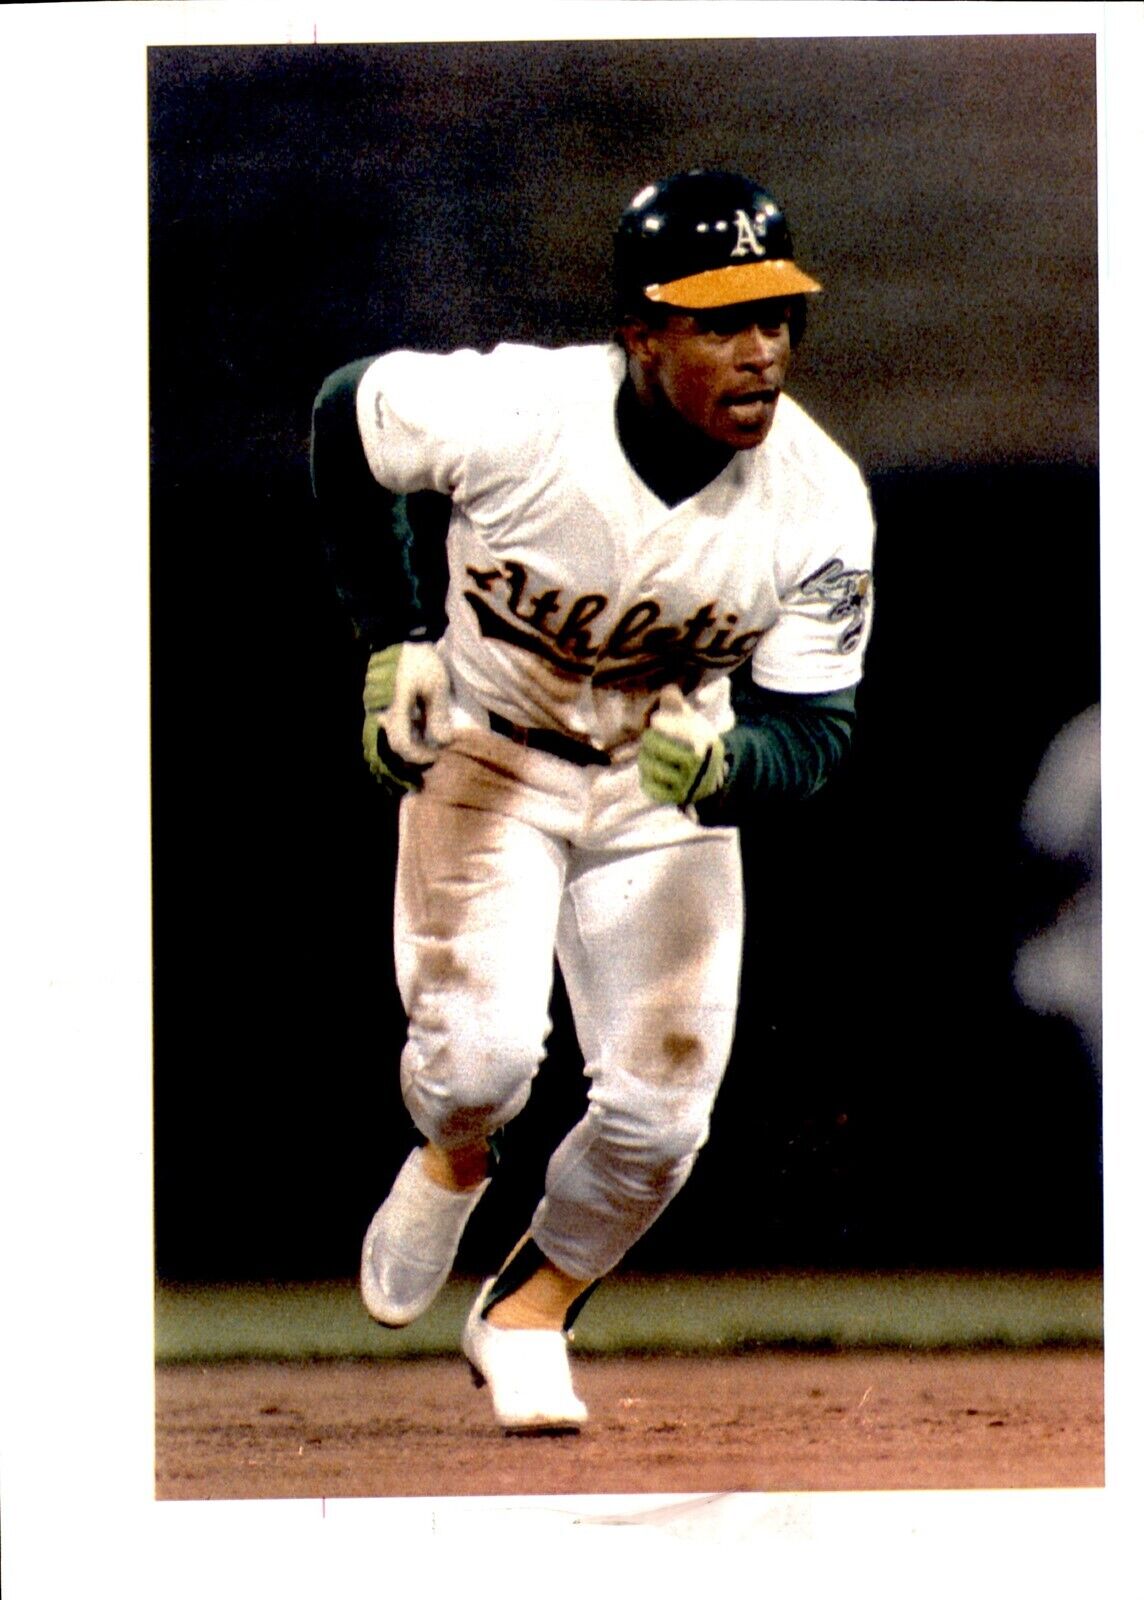 LD352 1991 Color Oversize Wire Photo RICKEY HENDERSON SCORES A'S @ ALCS GAME